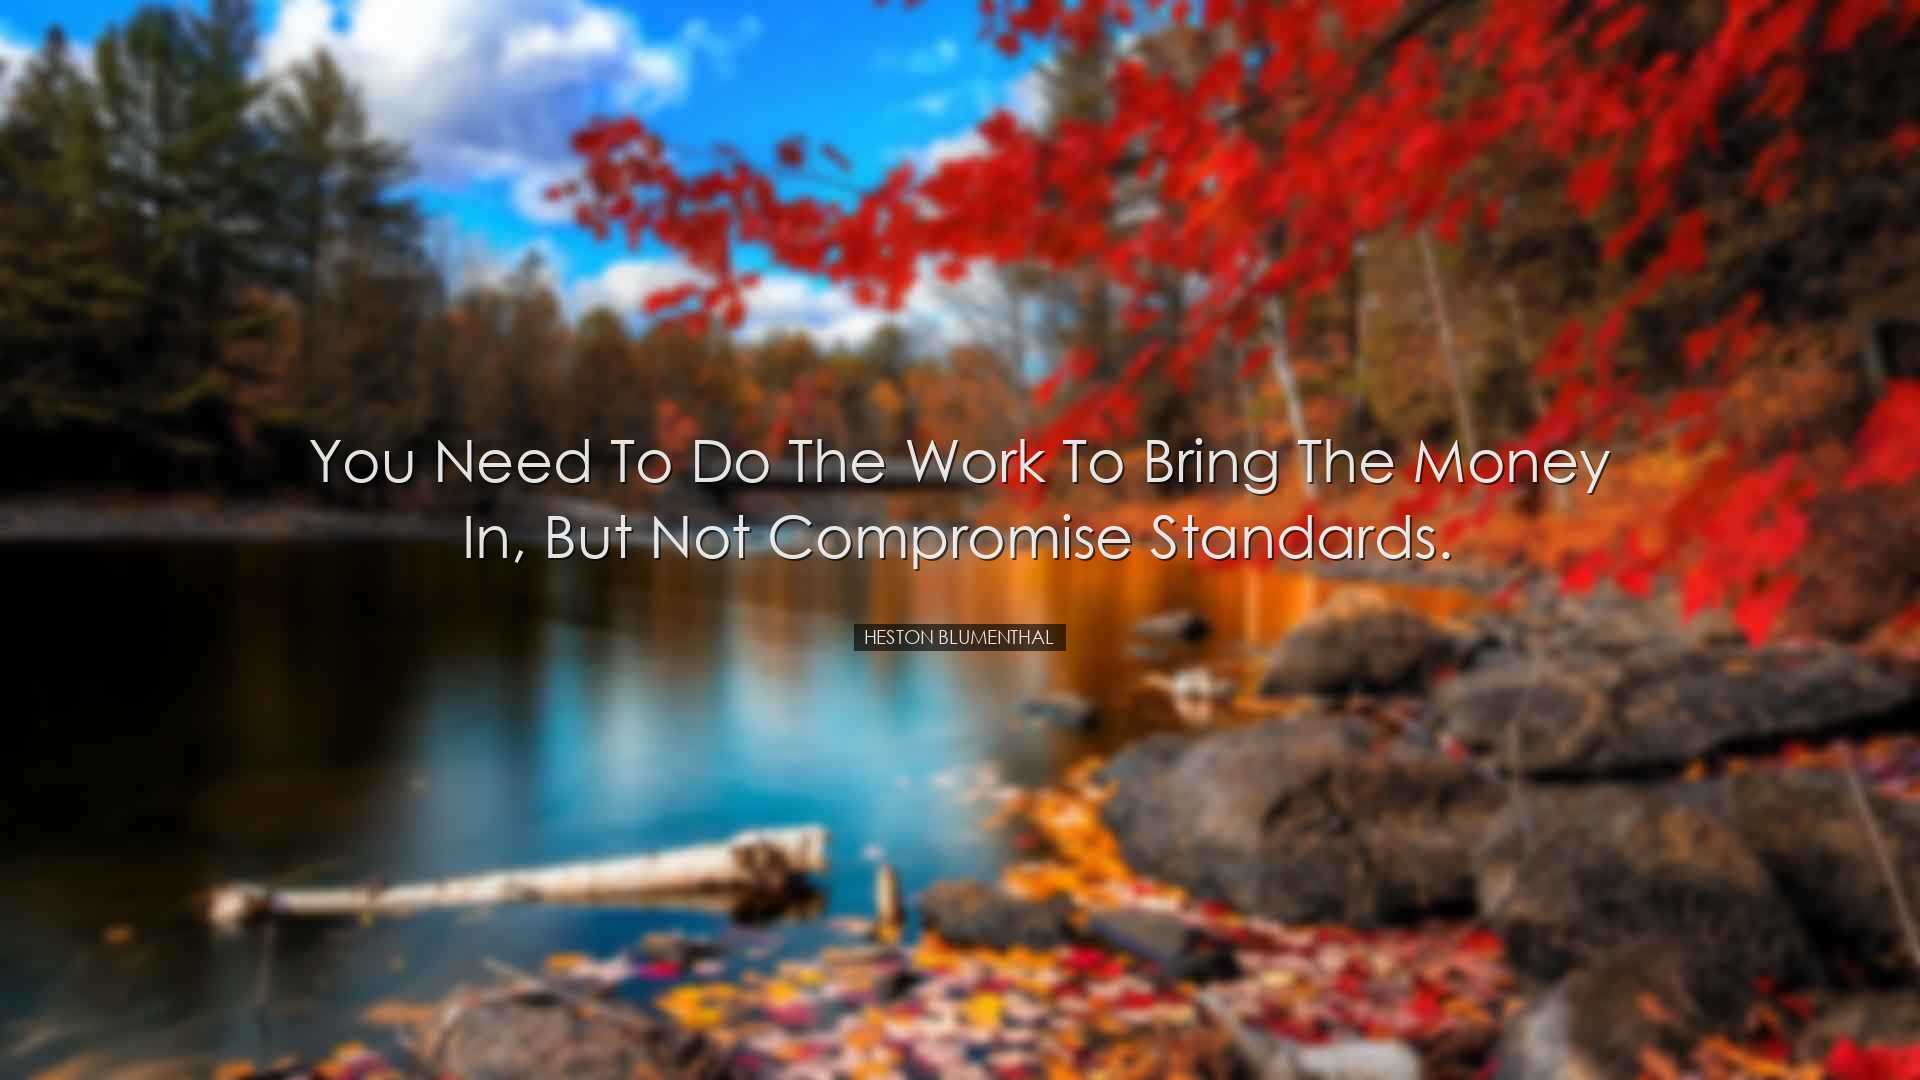 You need to do the work to bring the money in, but not compromise